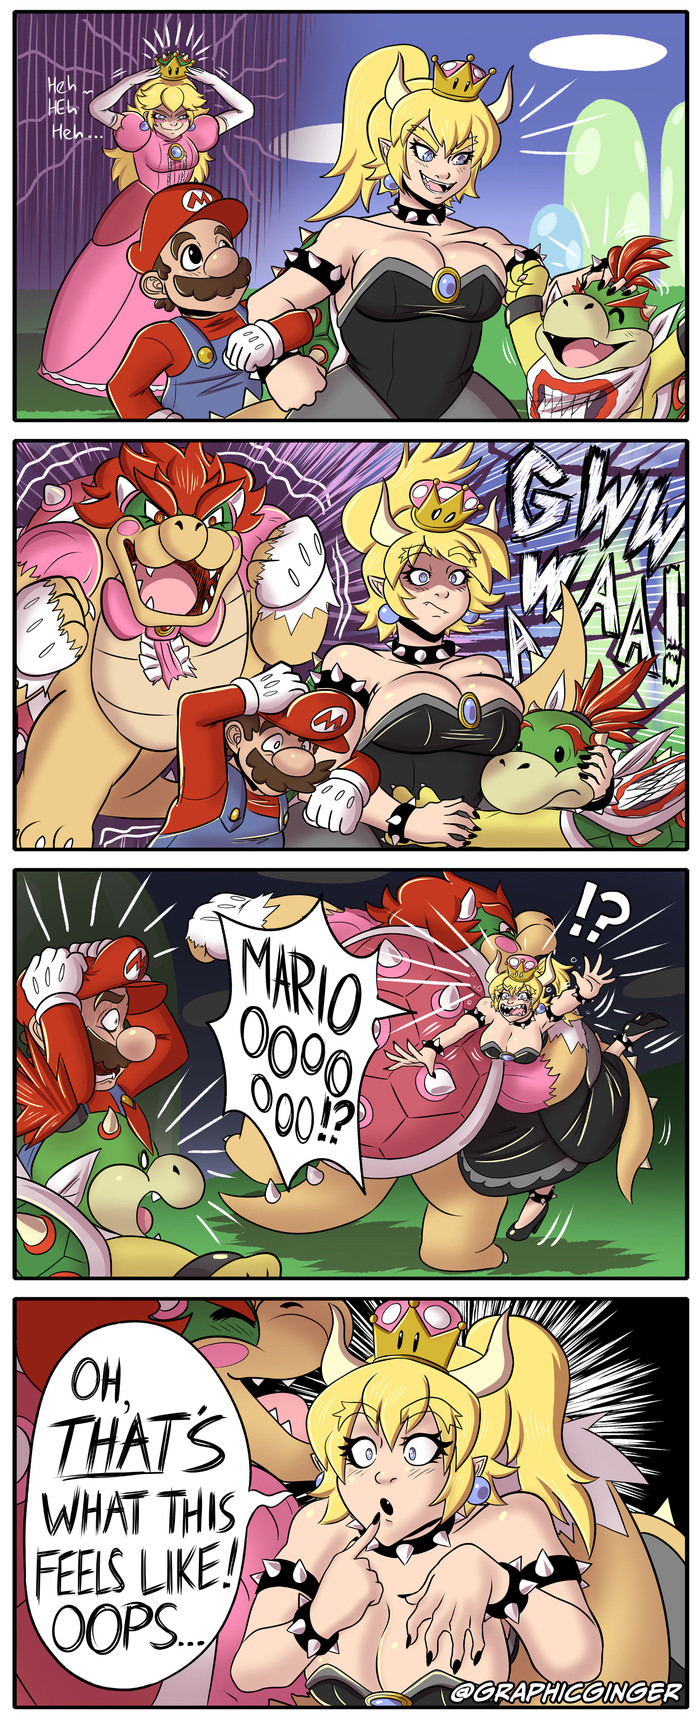 Oh, so this is how it feels to be kidnapped! Oops... - , Super crown, Bowsette, Comics, Mario, Super mario, Humor, Longpost